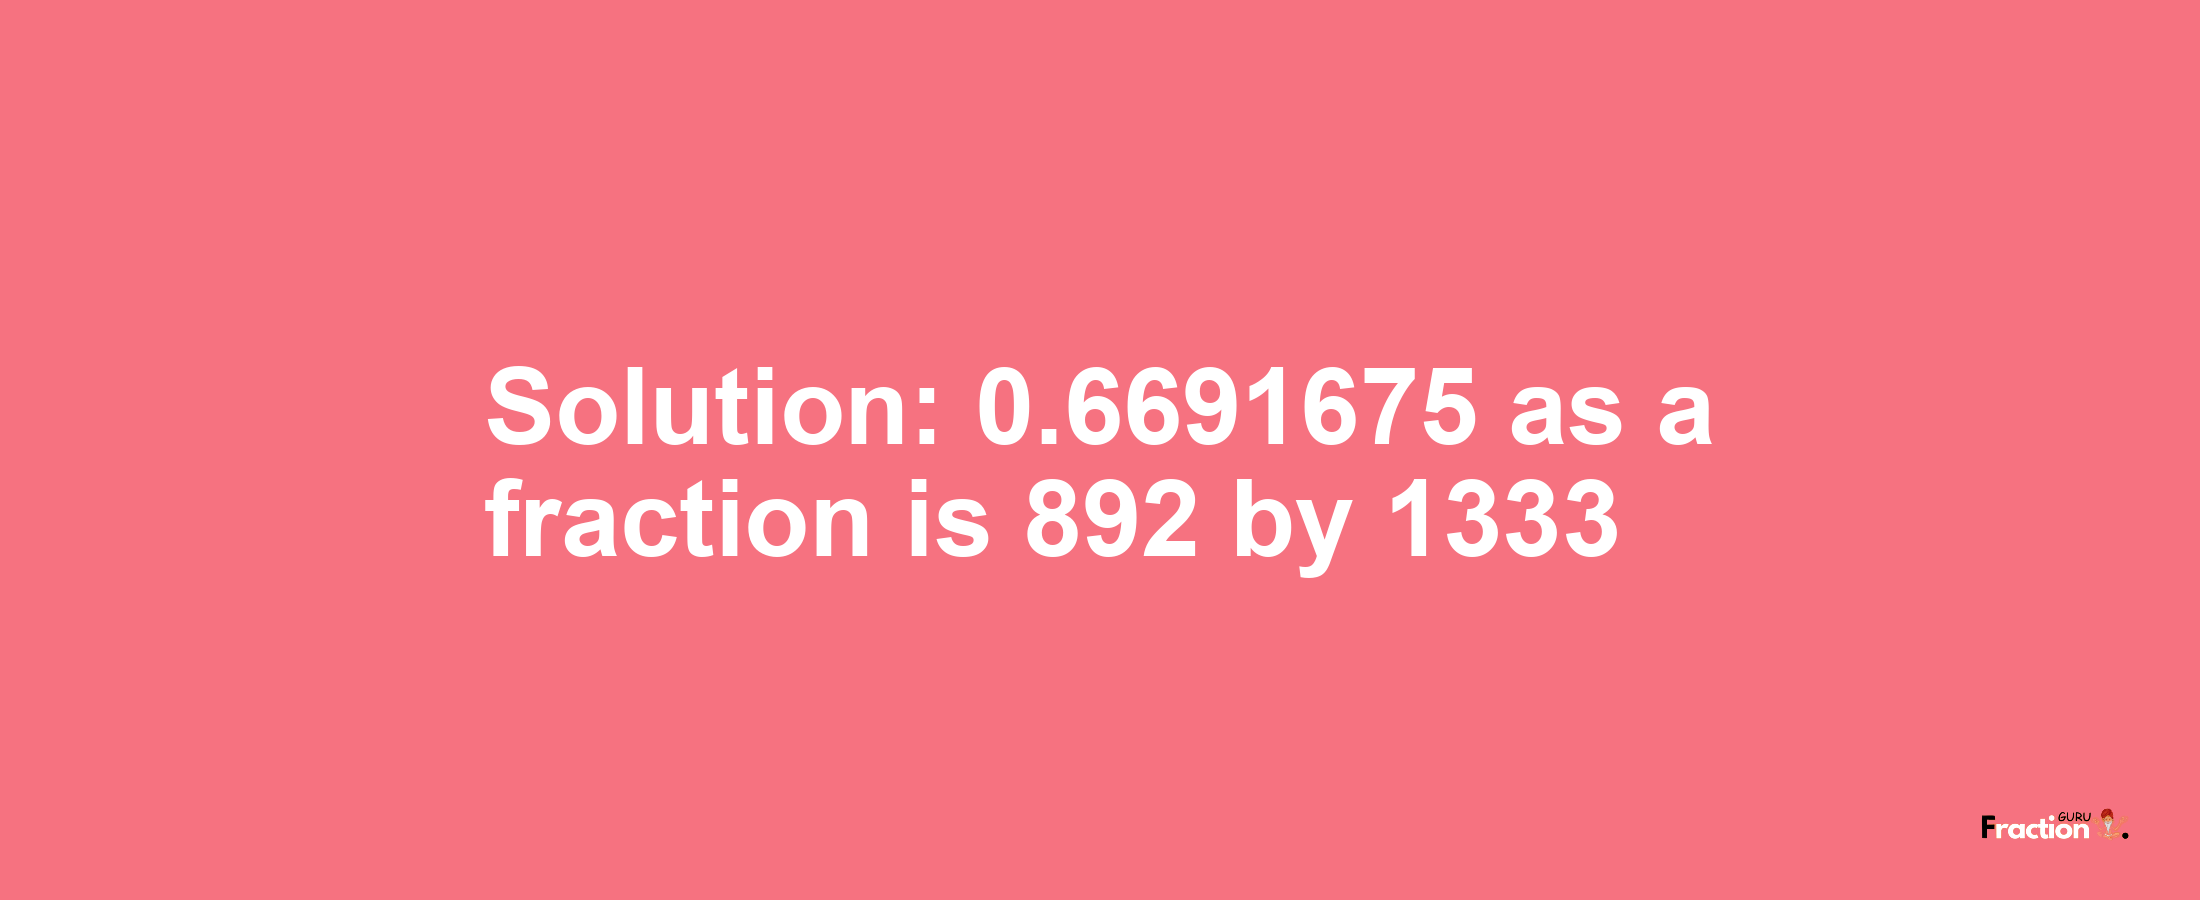 Solution:0.6691675 as a fraction is 892/1333